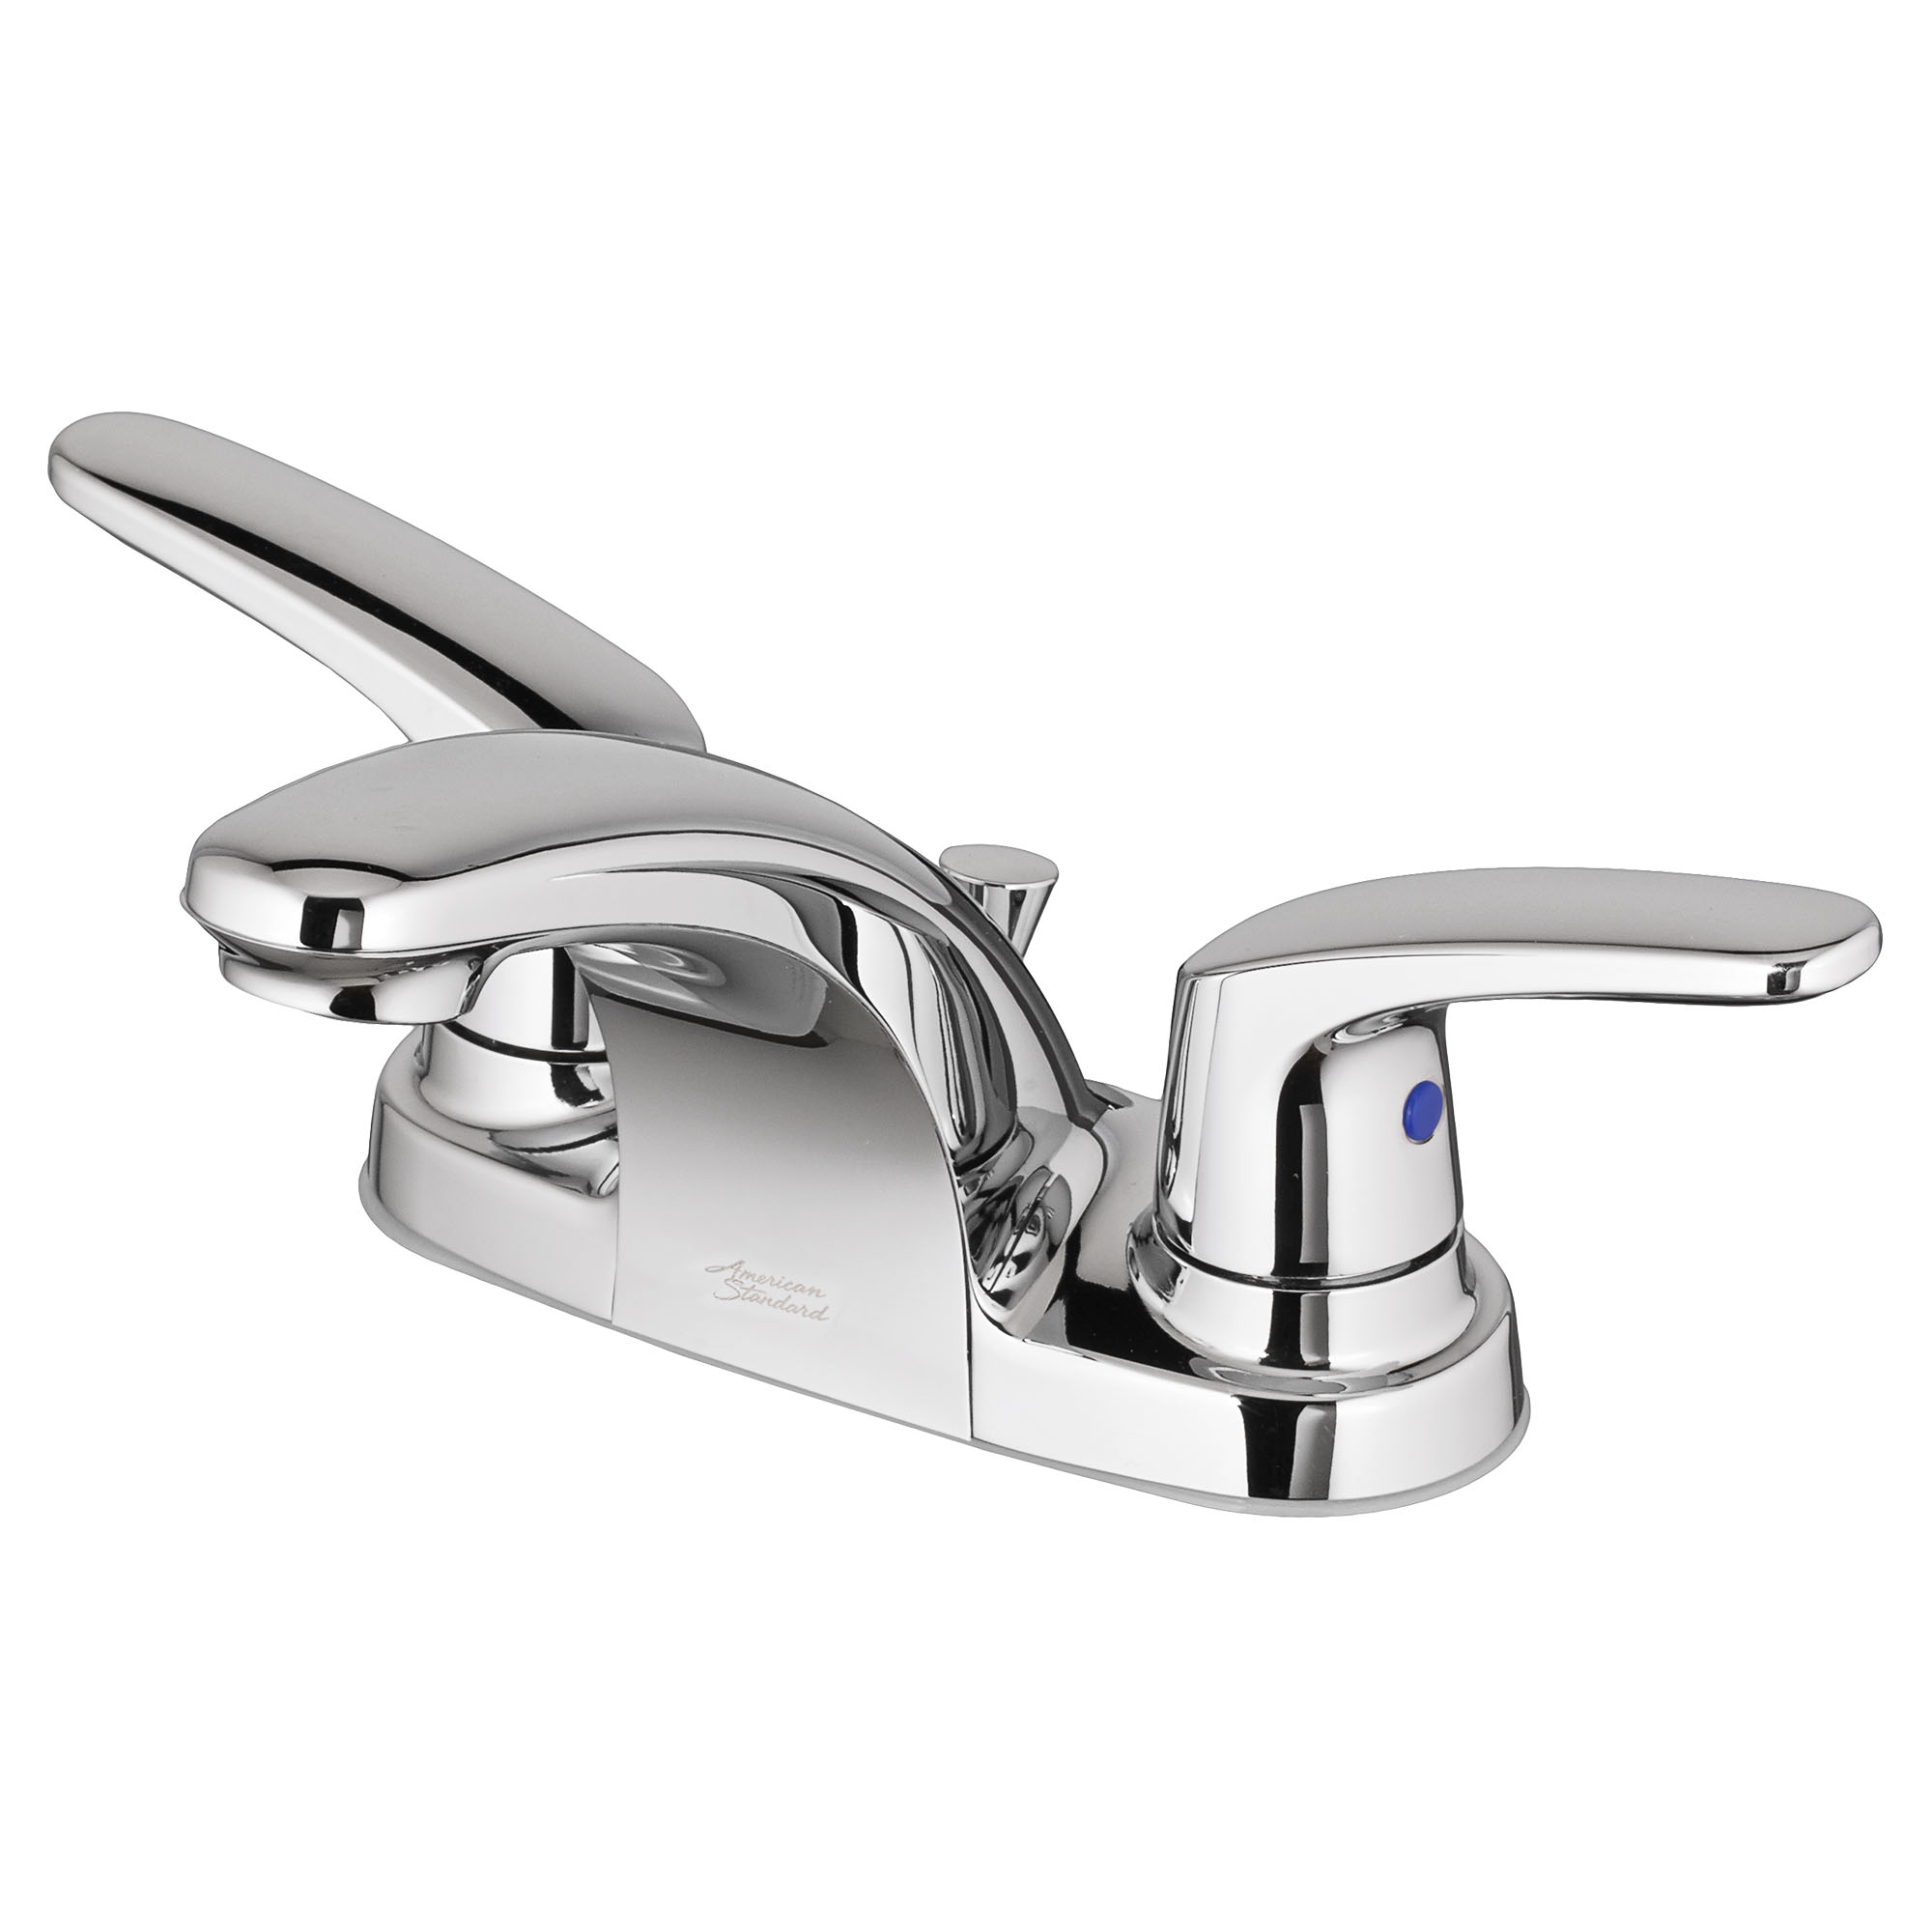 Colony® PRO 4-Inch Centerset 2-Handle Bathroom Faucet 1.2 gpm/4.5 Lpm Less Drain, With Lever Handles